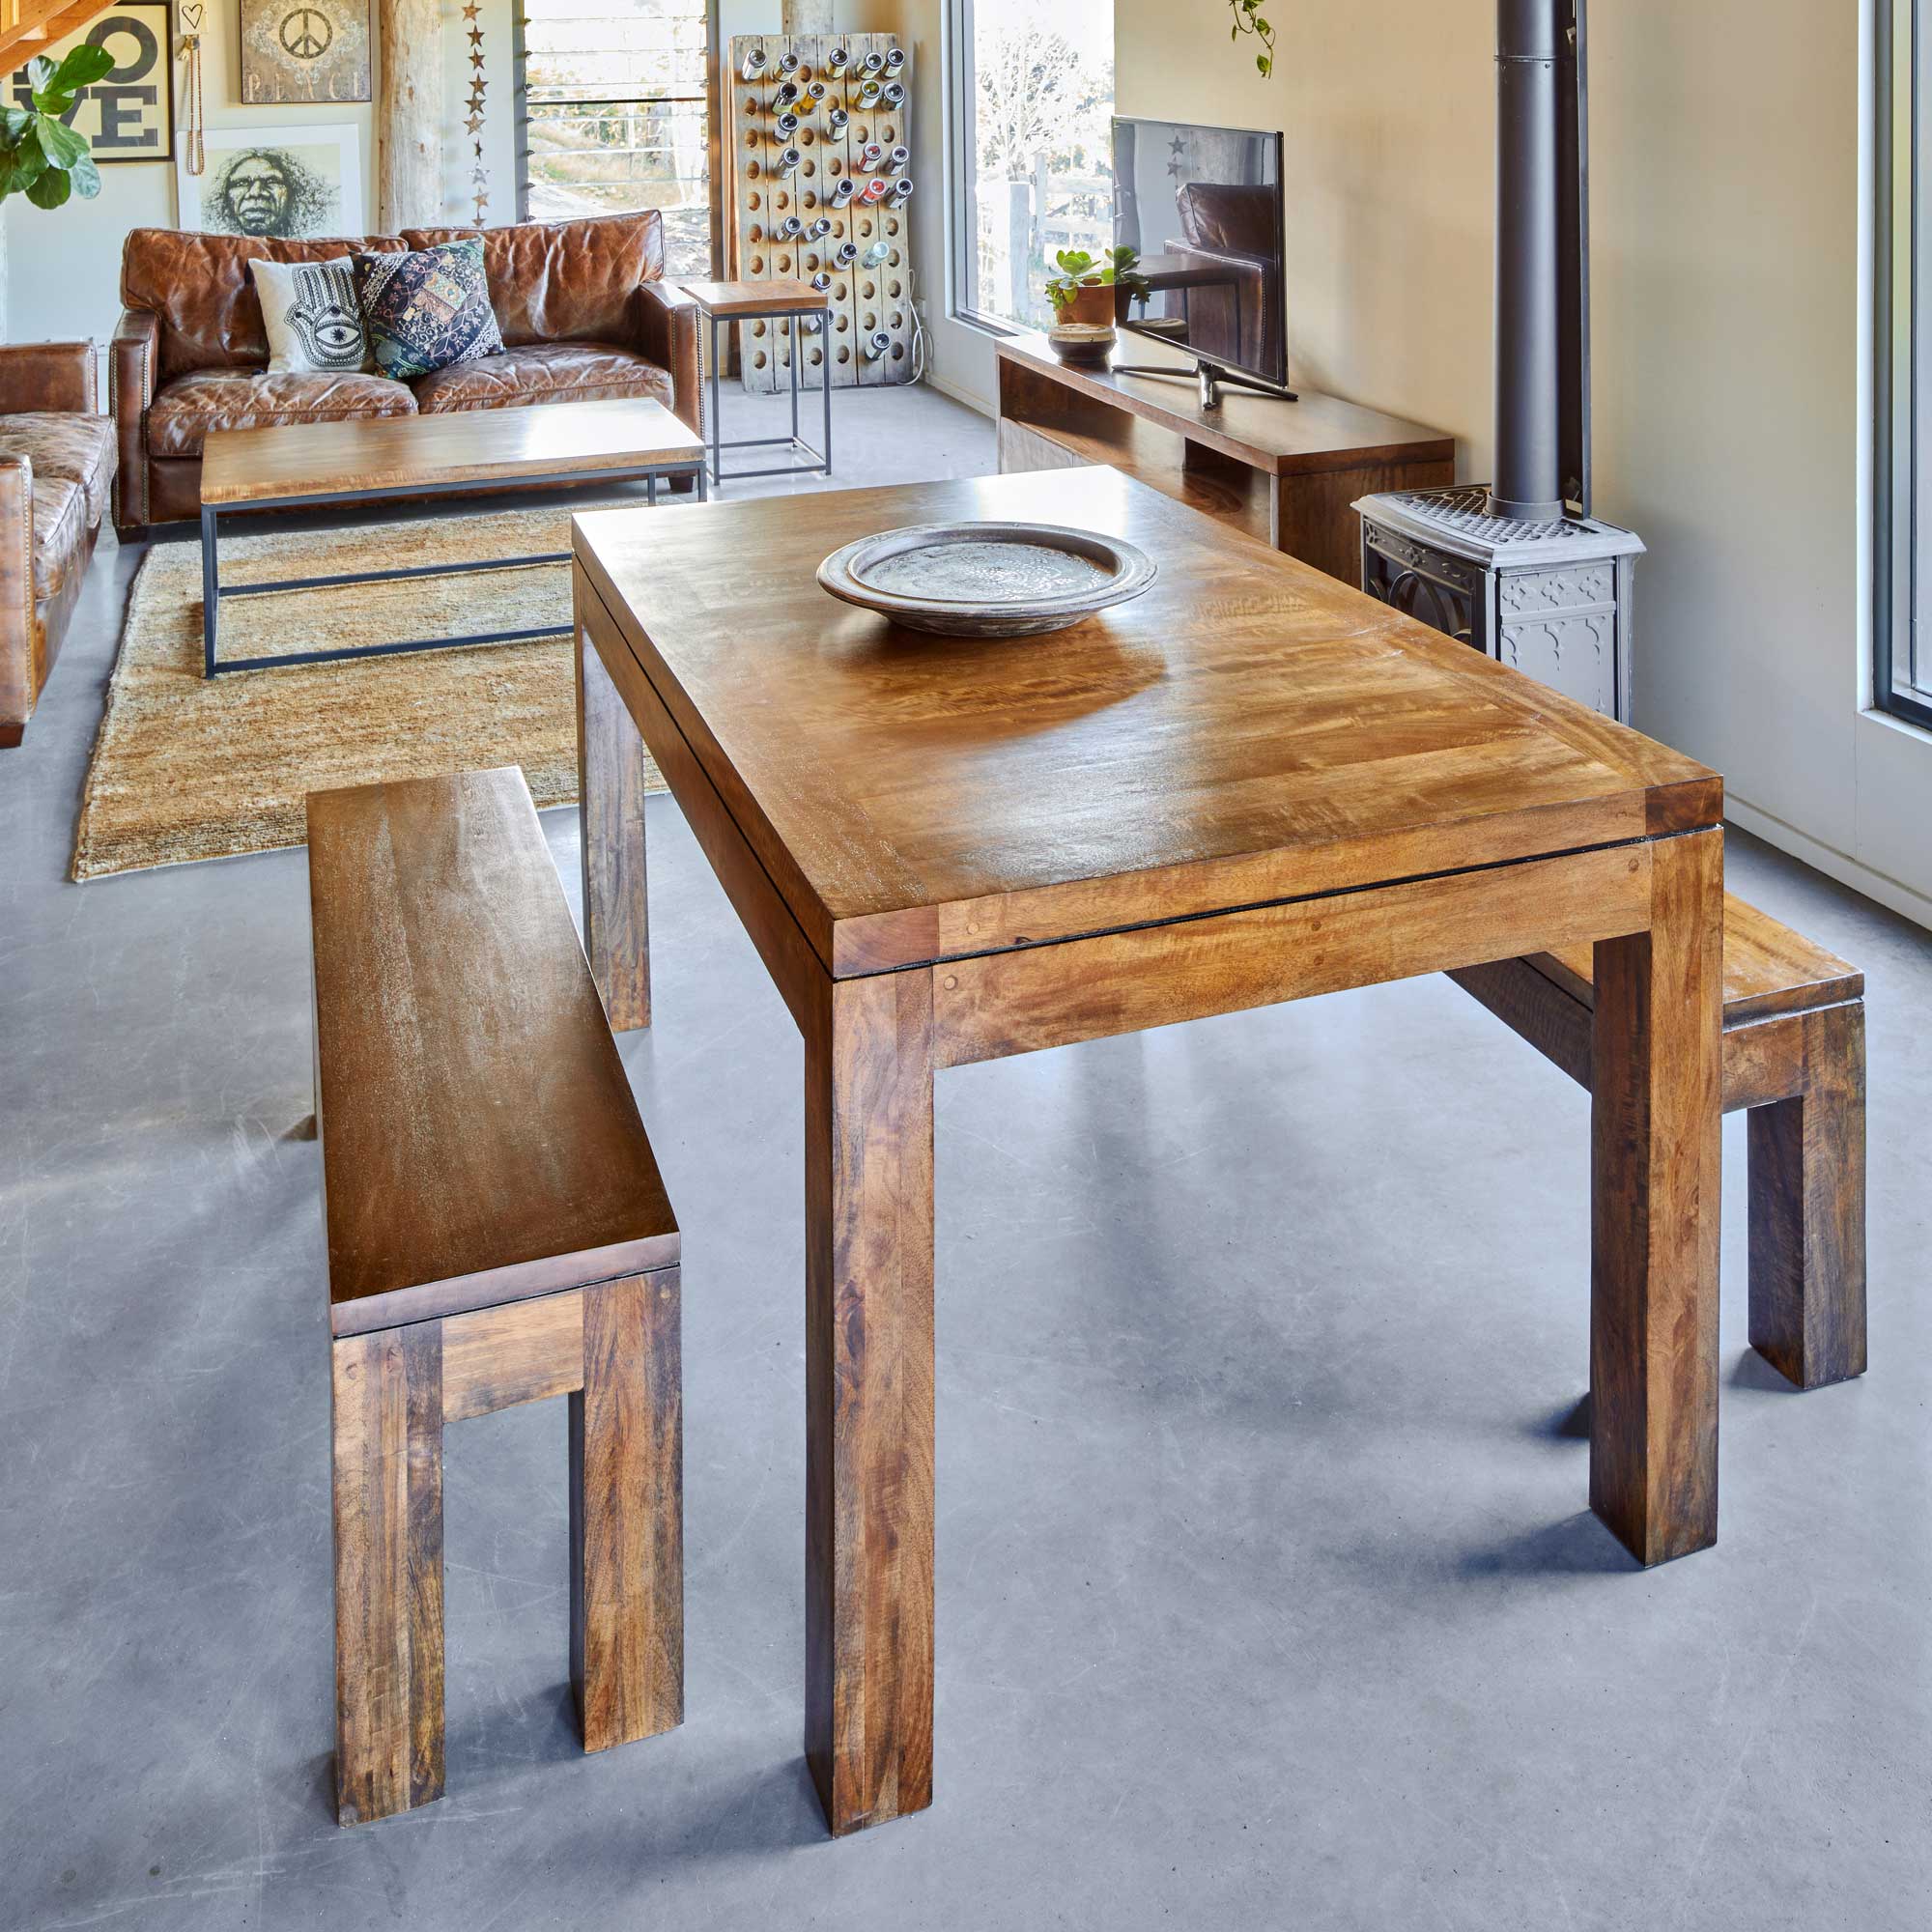 NEW-YORK-DINING-TABLE-BENCH-SET